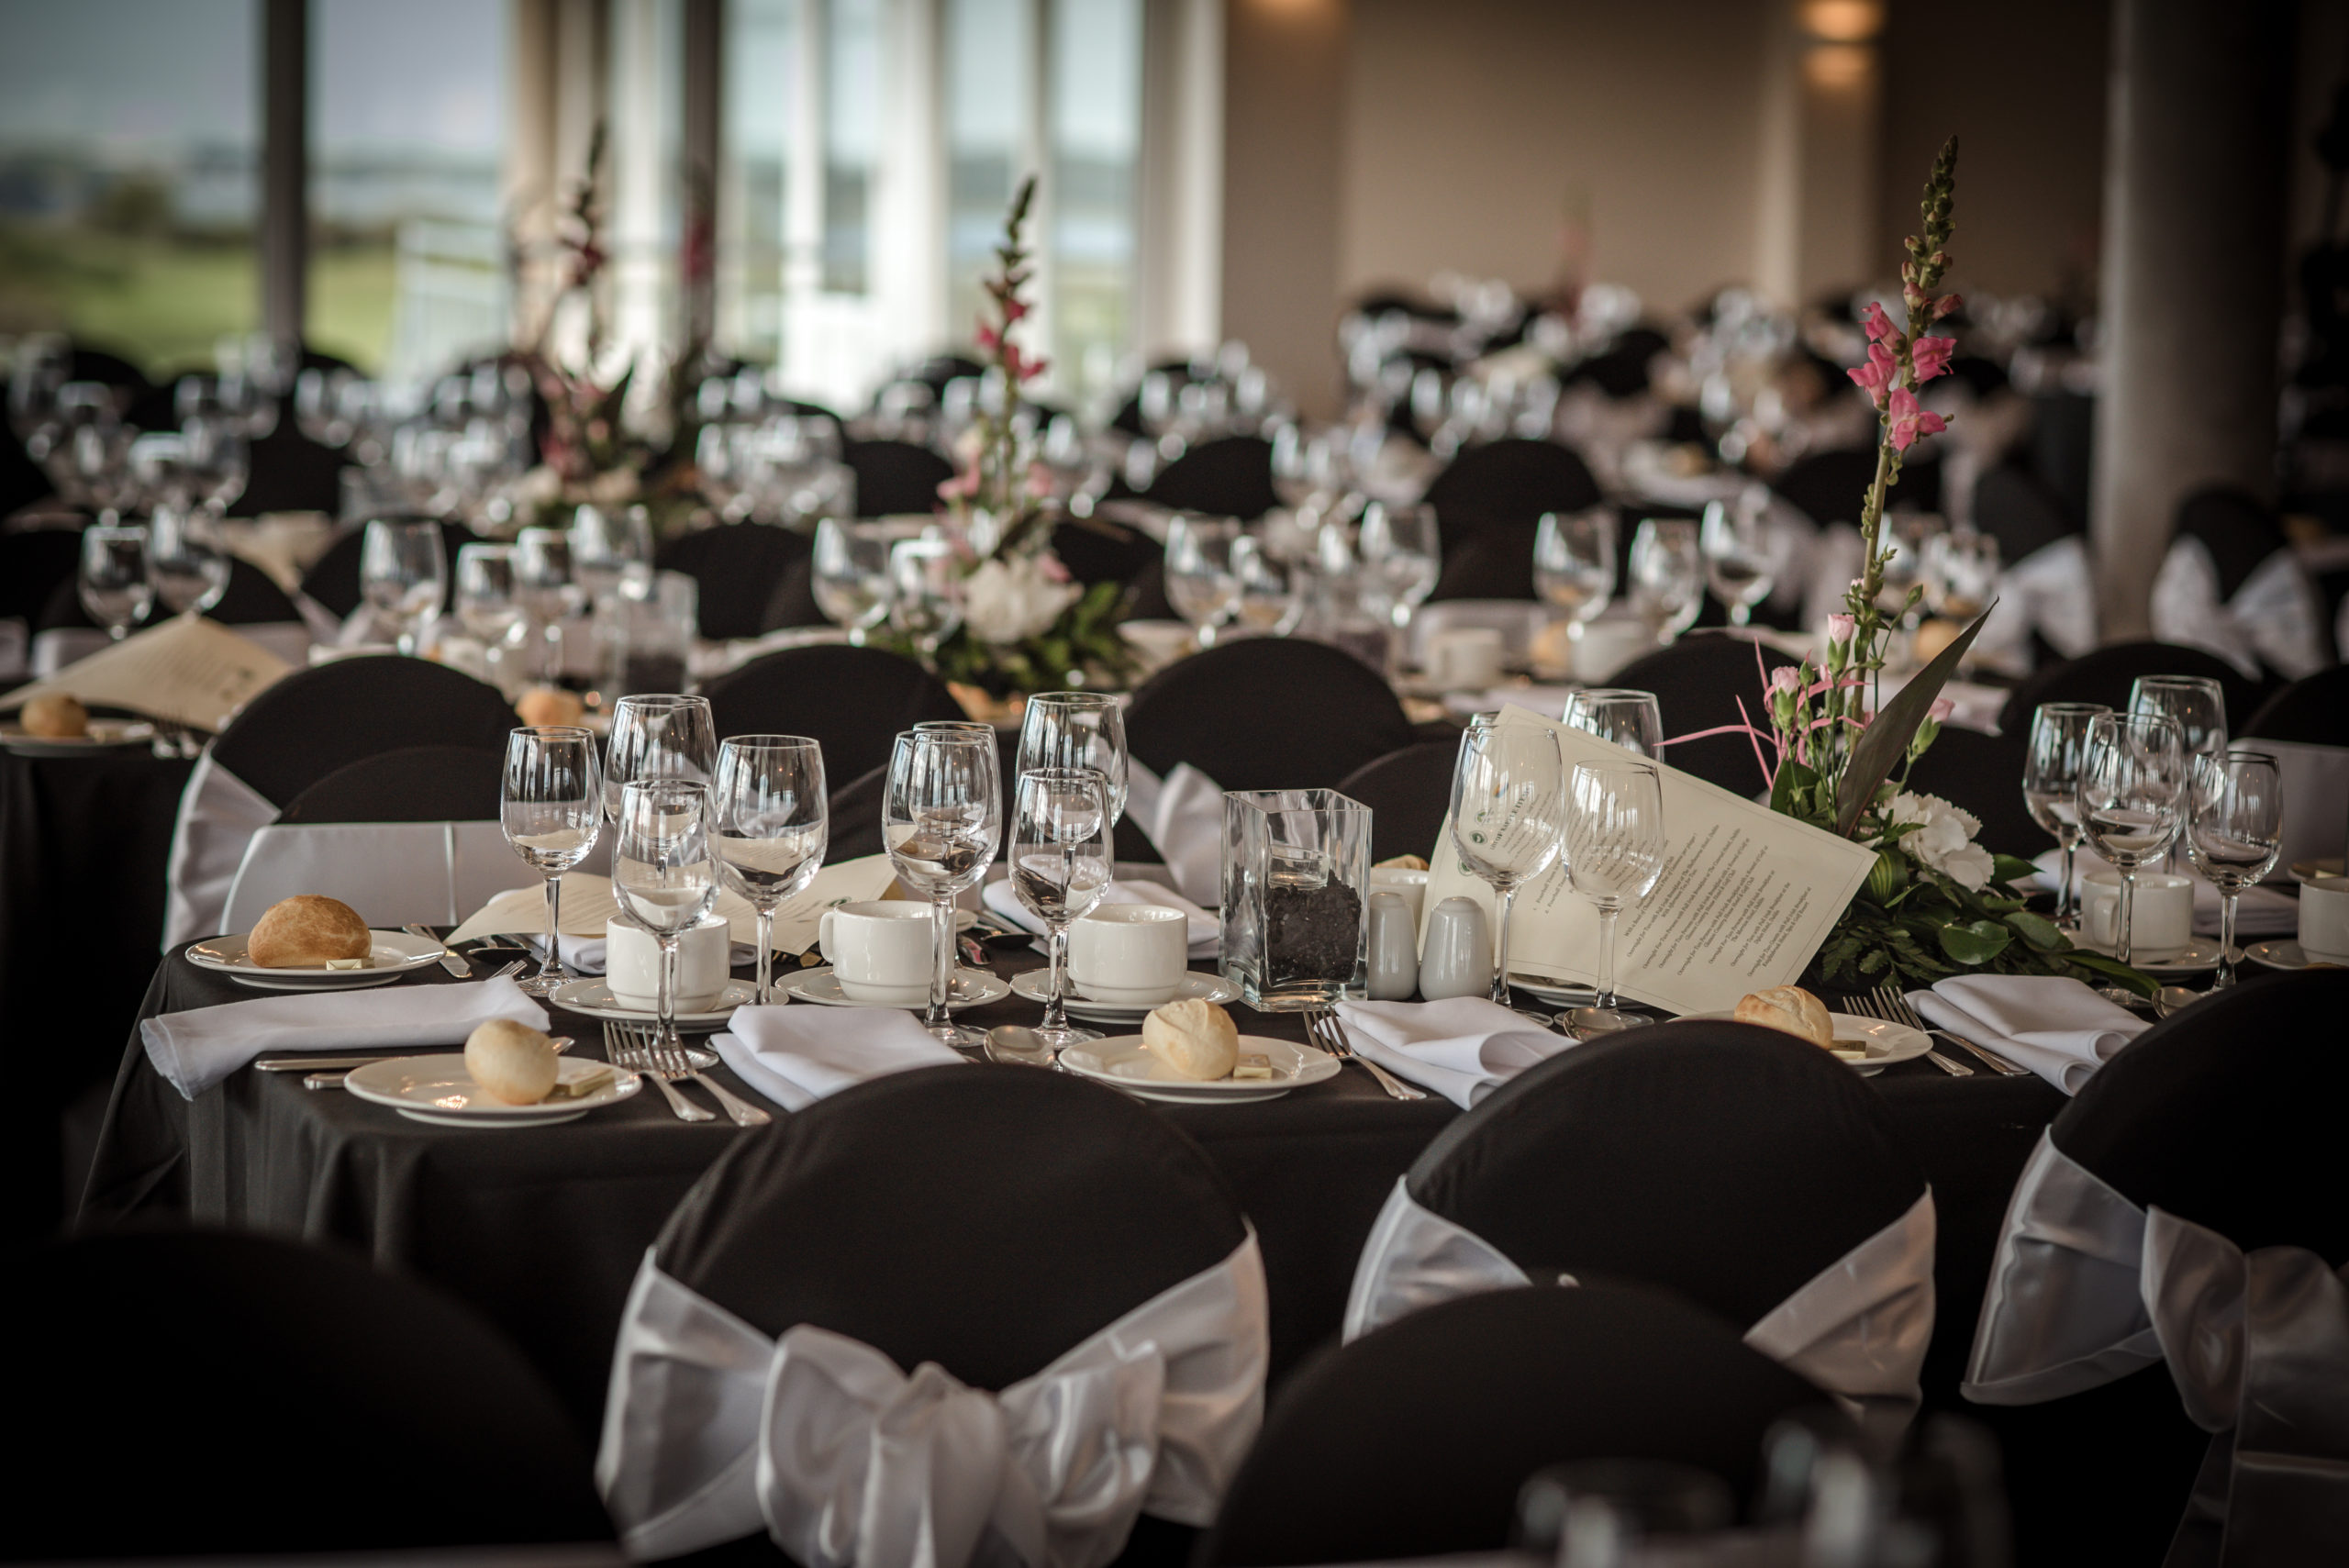 Weddings at Galway Bay Golf Resort, tables and chairs set up in function room